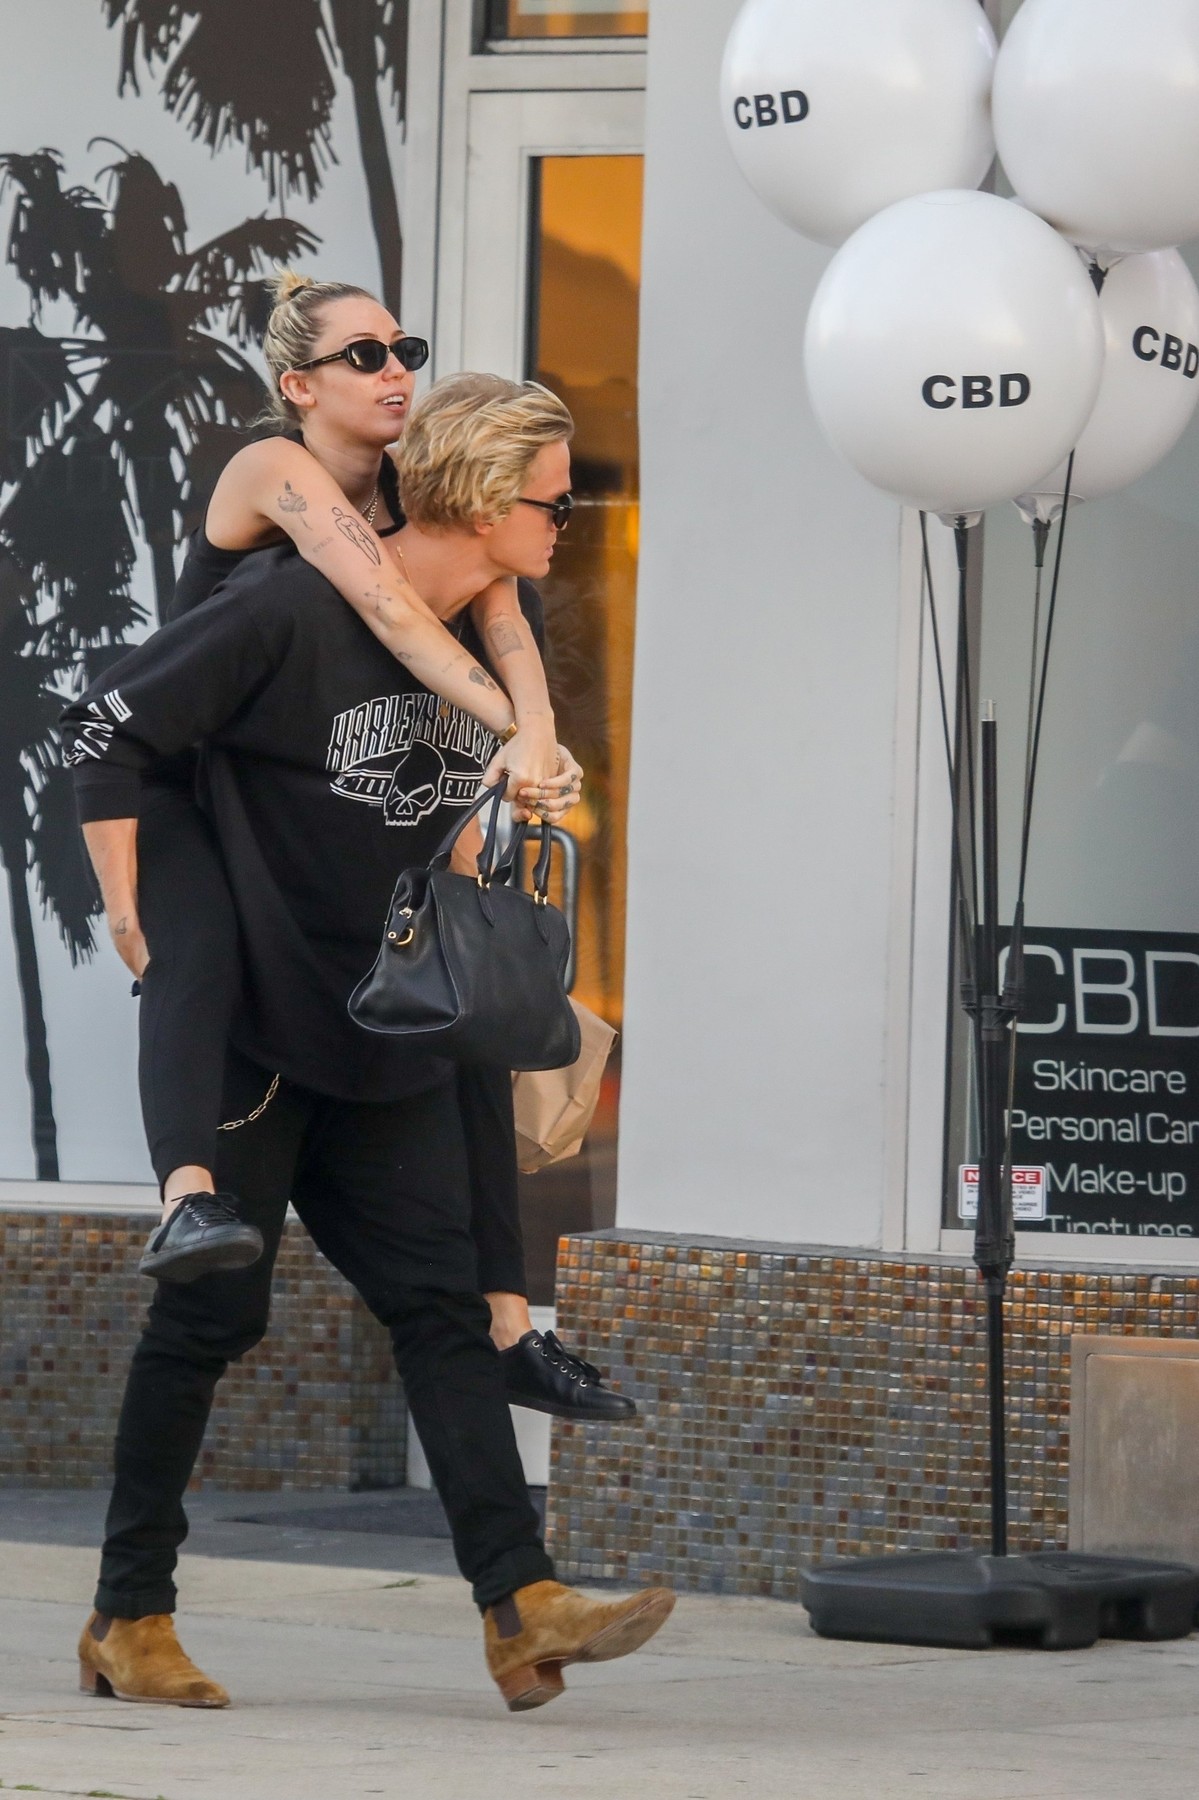 Malibu, CA  - *EXCLUSIVE* Cody Simpson gives his girlfriend Miley Cyrus a piggy-back-ride after lunch at Electric Karma Indian restaurant in West Hollywood, after spending three hours at a face spa in Beverly Hills.

BACKGRID USA 2 MARCH 2020,Image: 502634041, License: Rights-managed, Restrictions: , Model Release: no, Credit line: RMBI / BACKGRID / Backgrid USA / Profimedia